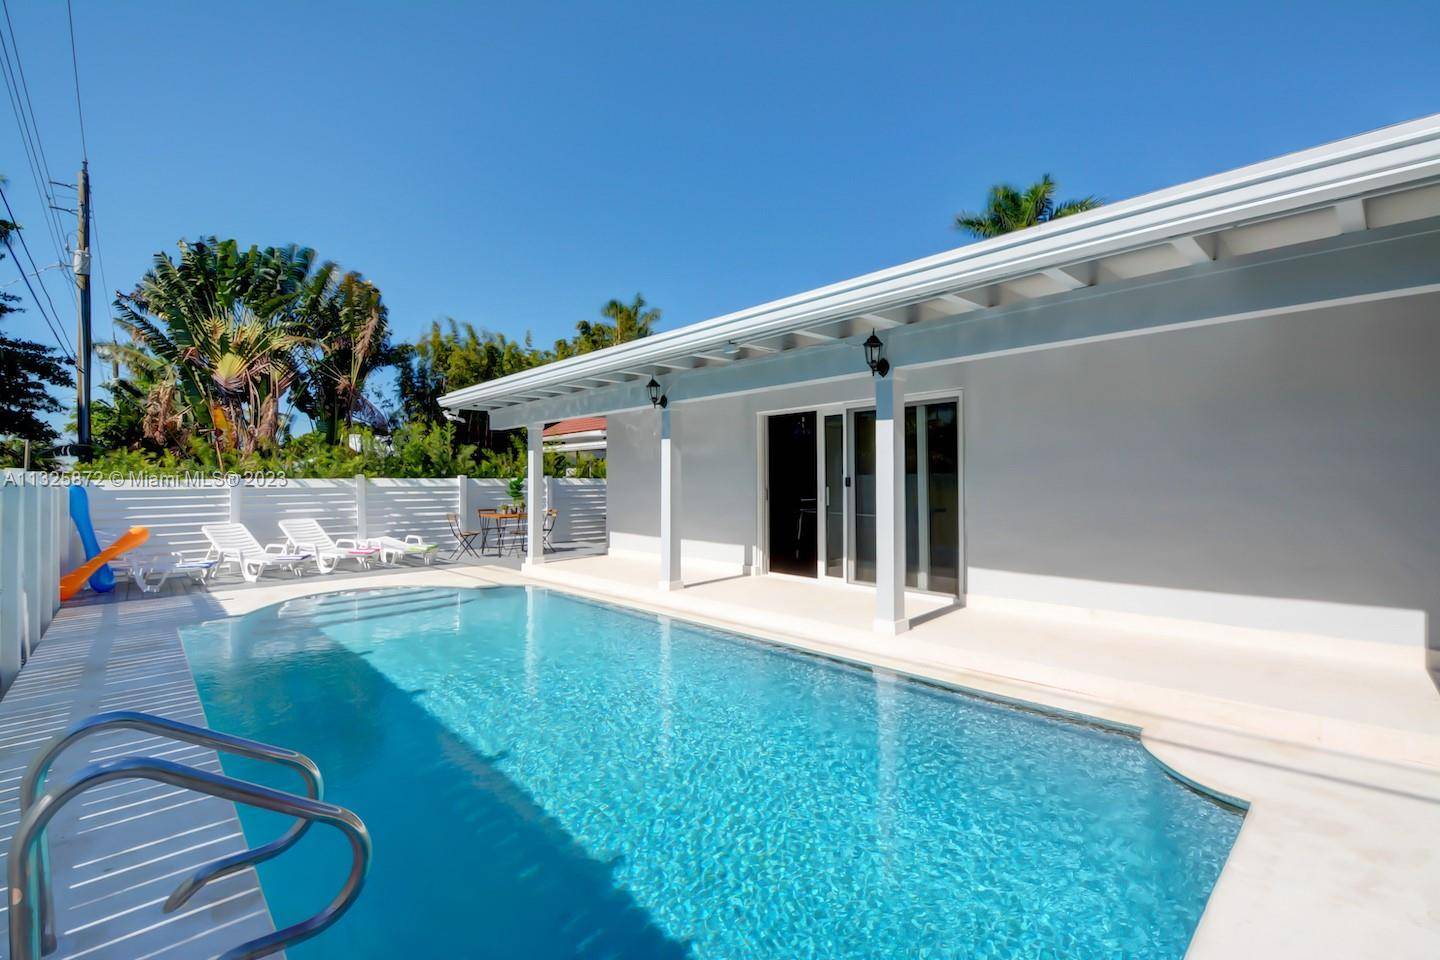 This is a short term Monthly Weekly Rental Monthly rate 11, 999 Call agent for a Weekly Rent Price Fully Renovated Luxury 5 Bedrooms 3 Baths Villa with Heated Pool ...